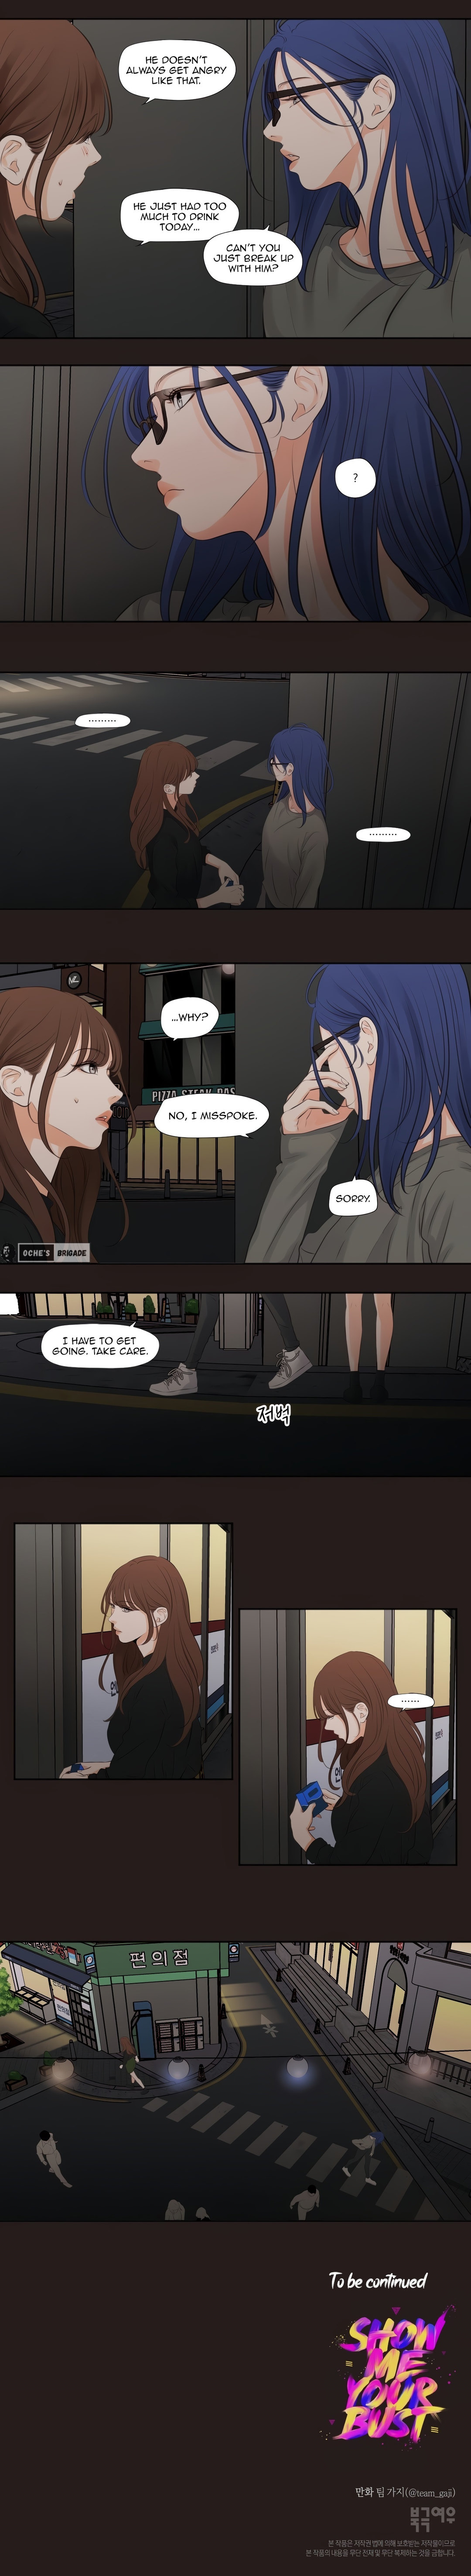 Show Me Your Bust - Chapter 21 Page 6